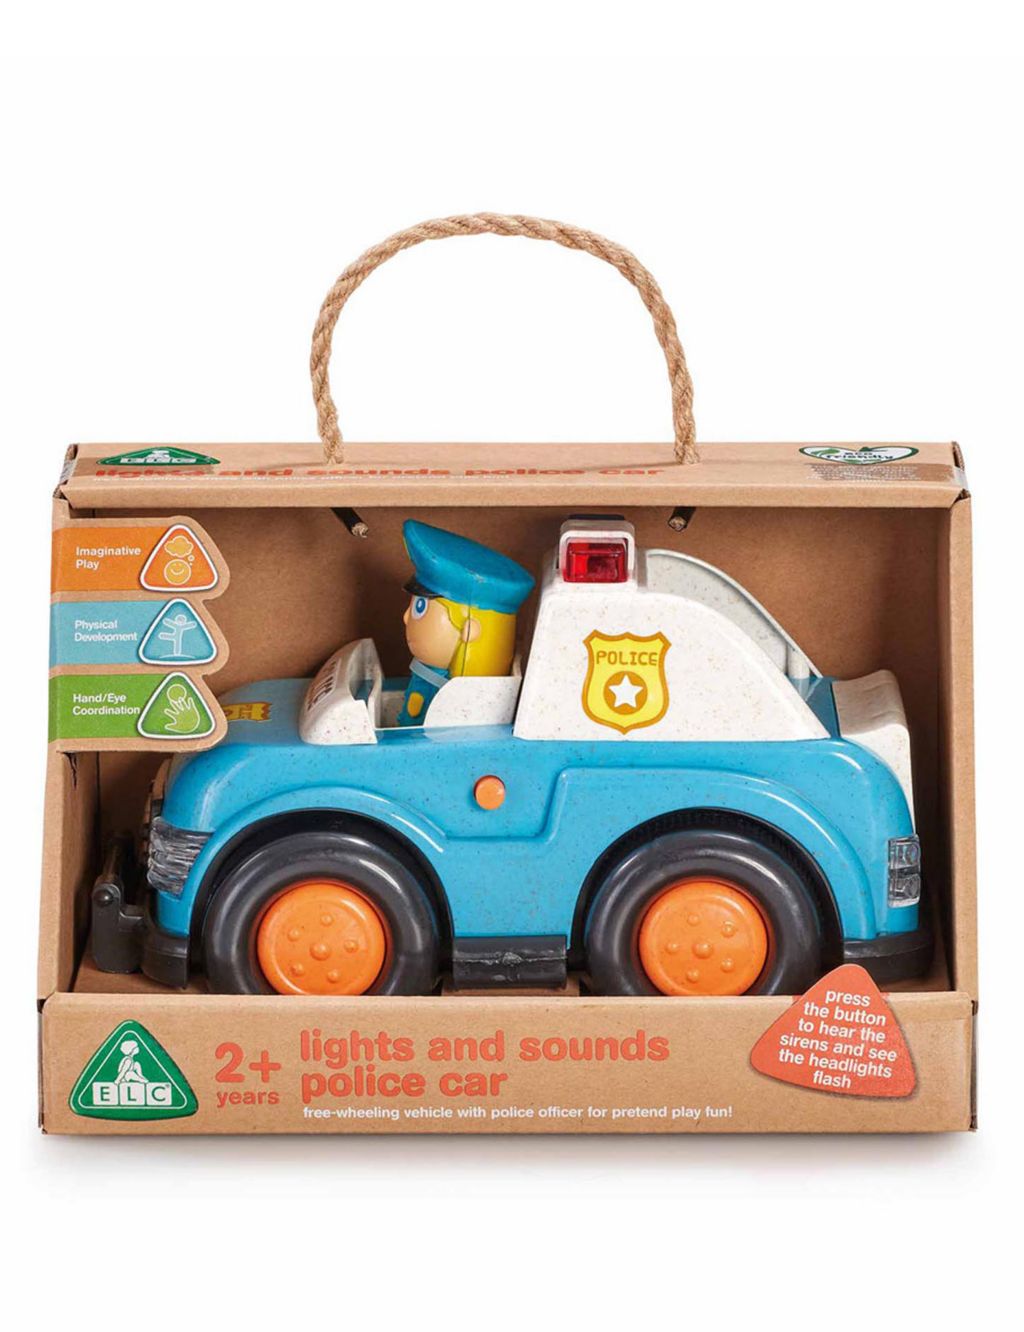 Lights and Sounds Police Car Toy (2+ Yrs) image 2